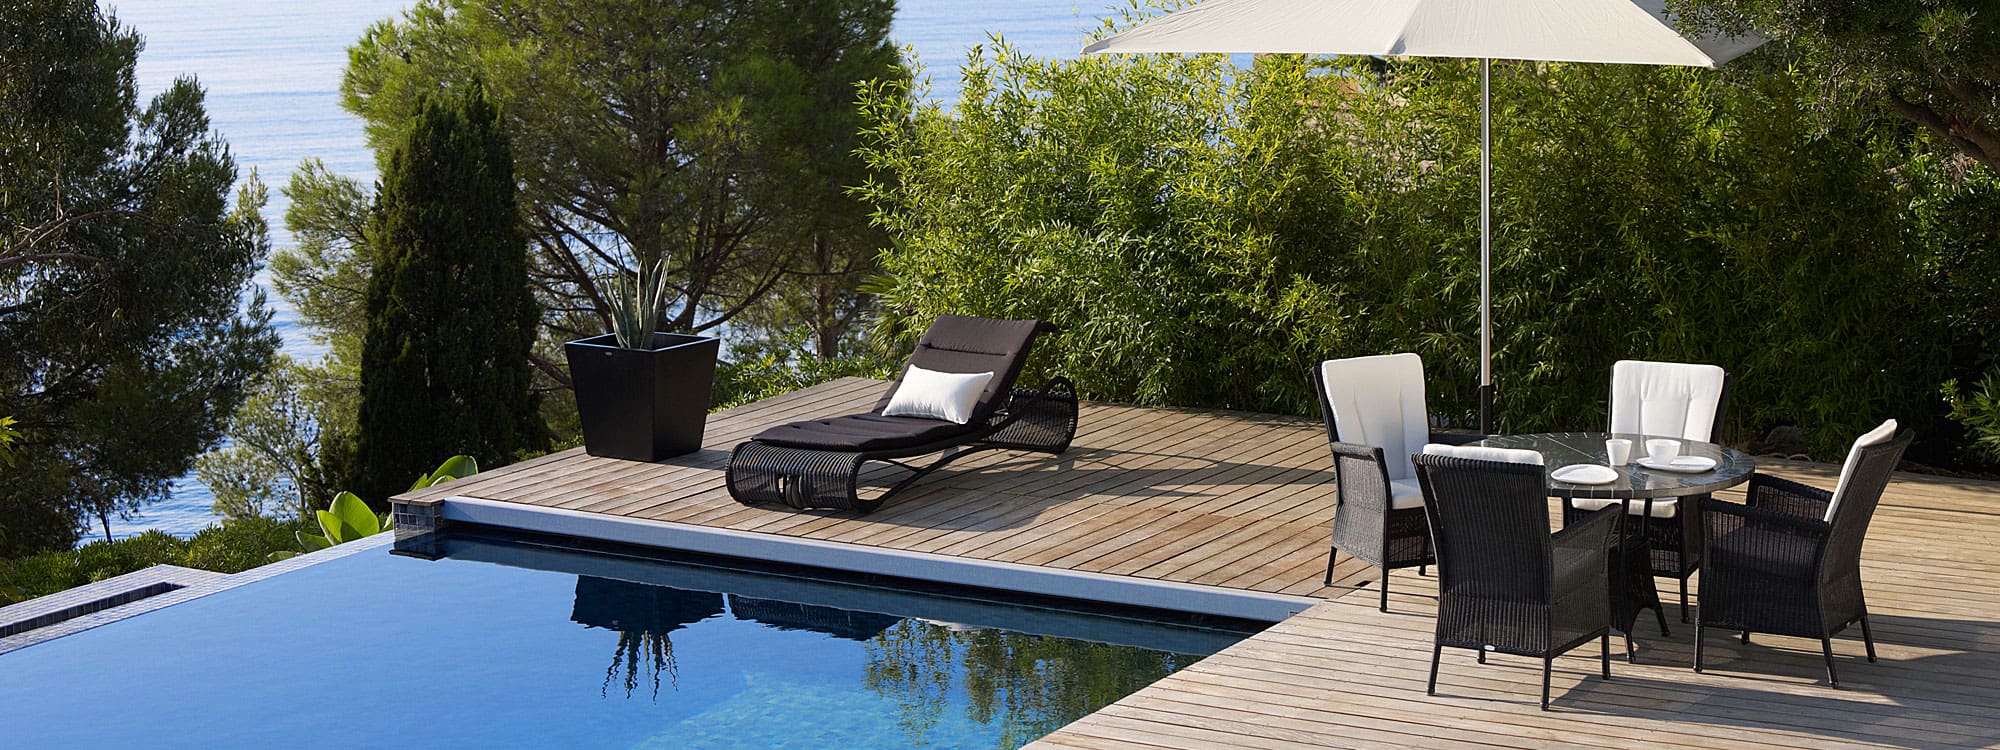 Image of Cane-line's Escape adjustable black sun lounger on wooden decking next to sunny poolside